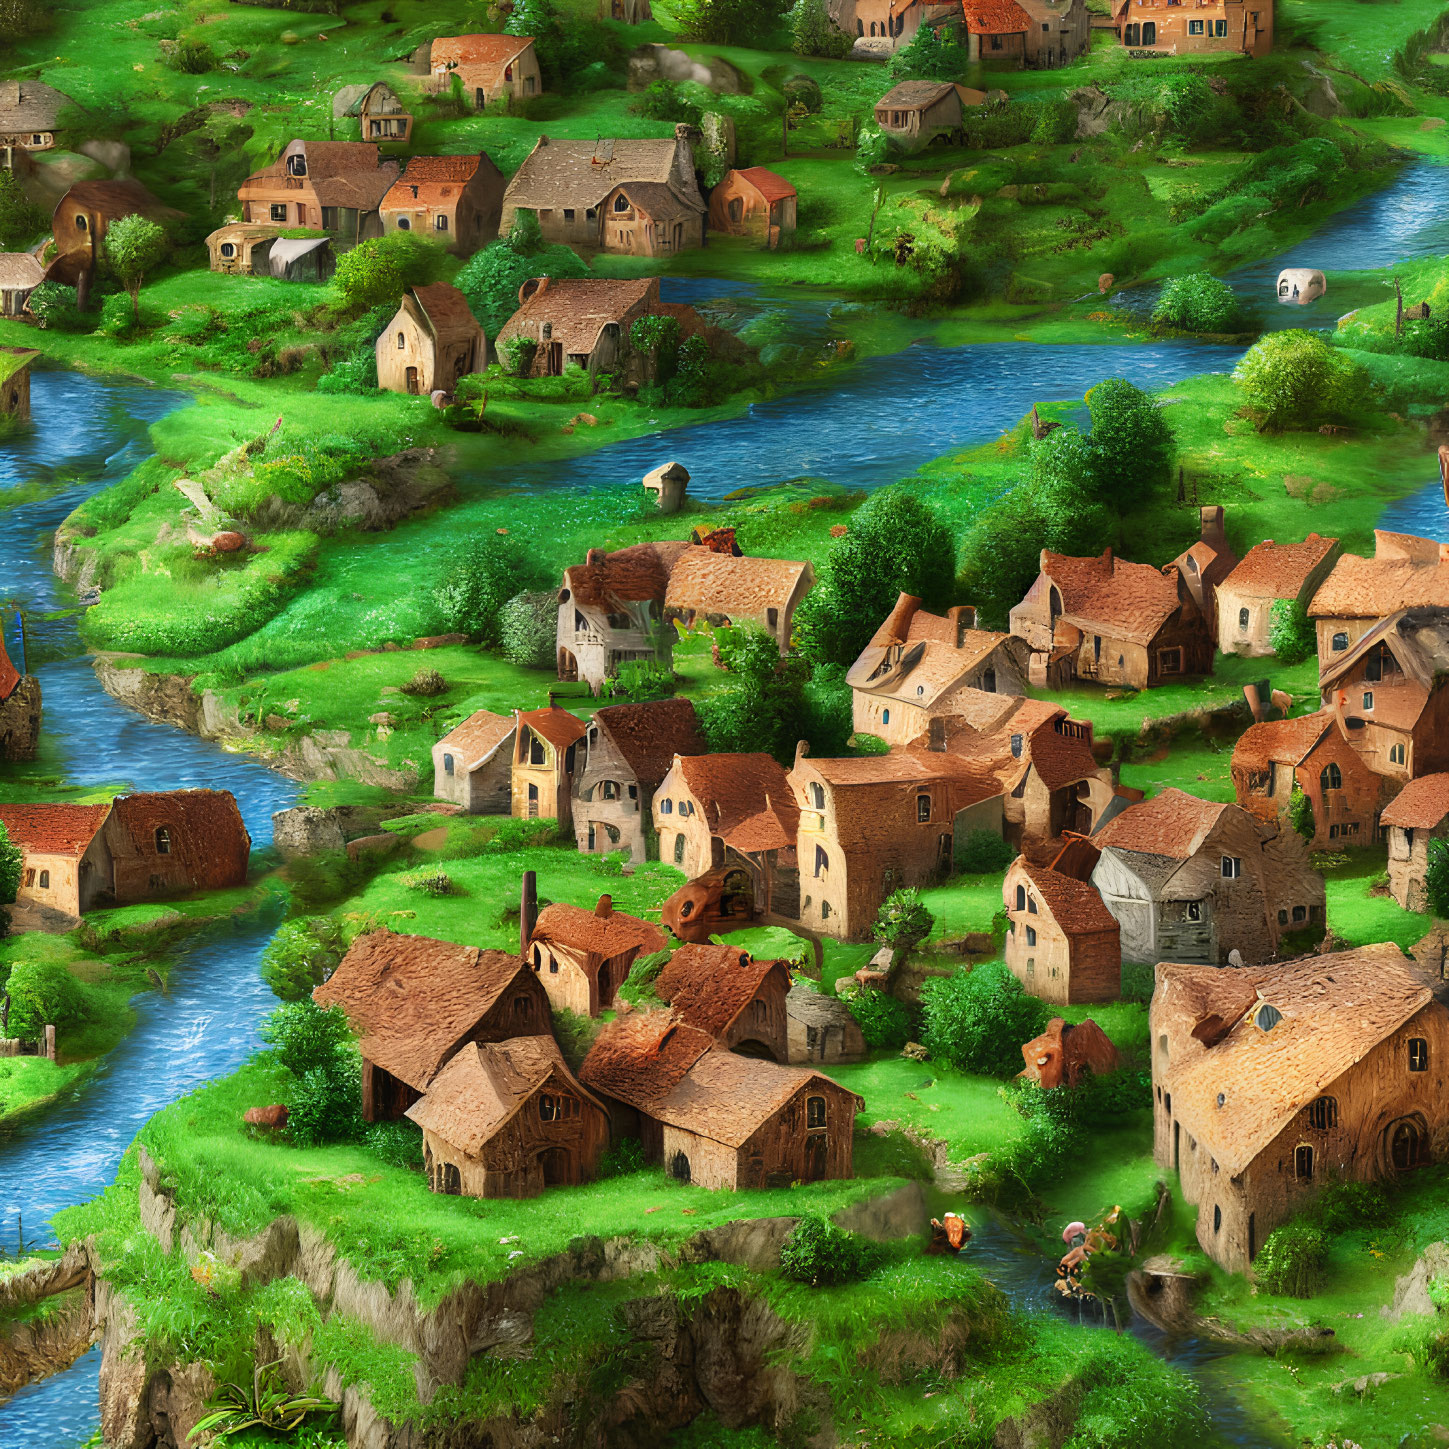 Colorful Illustration of Whimsical Village with Quaint Houses & Rivers